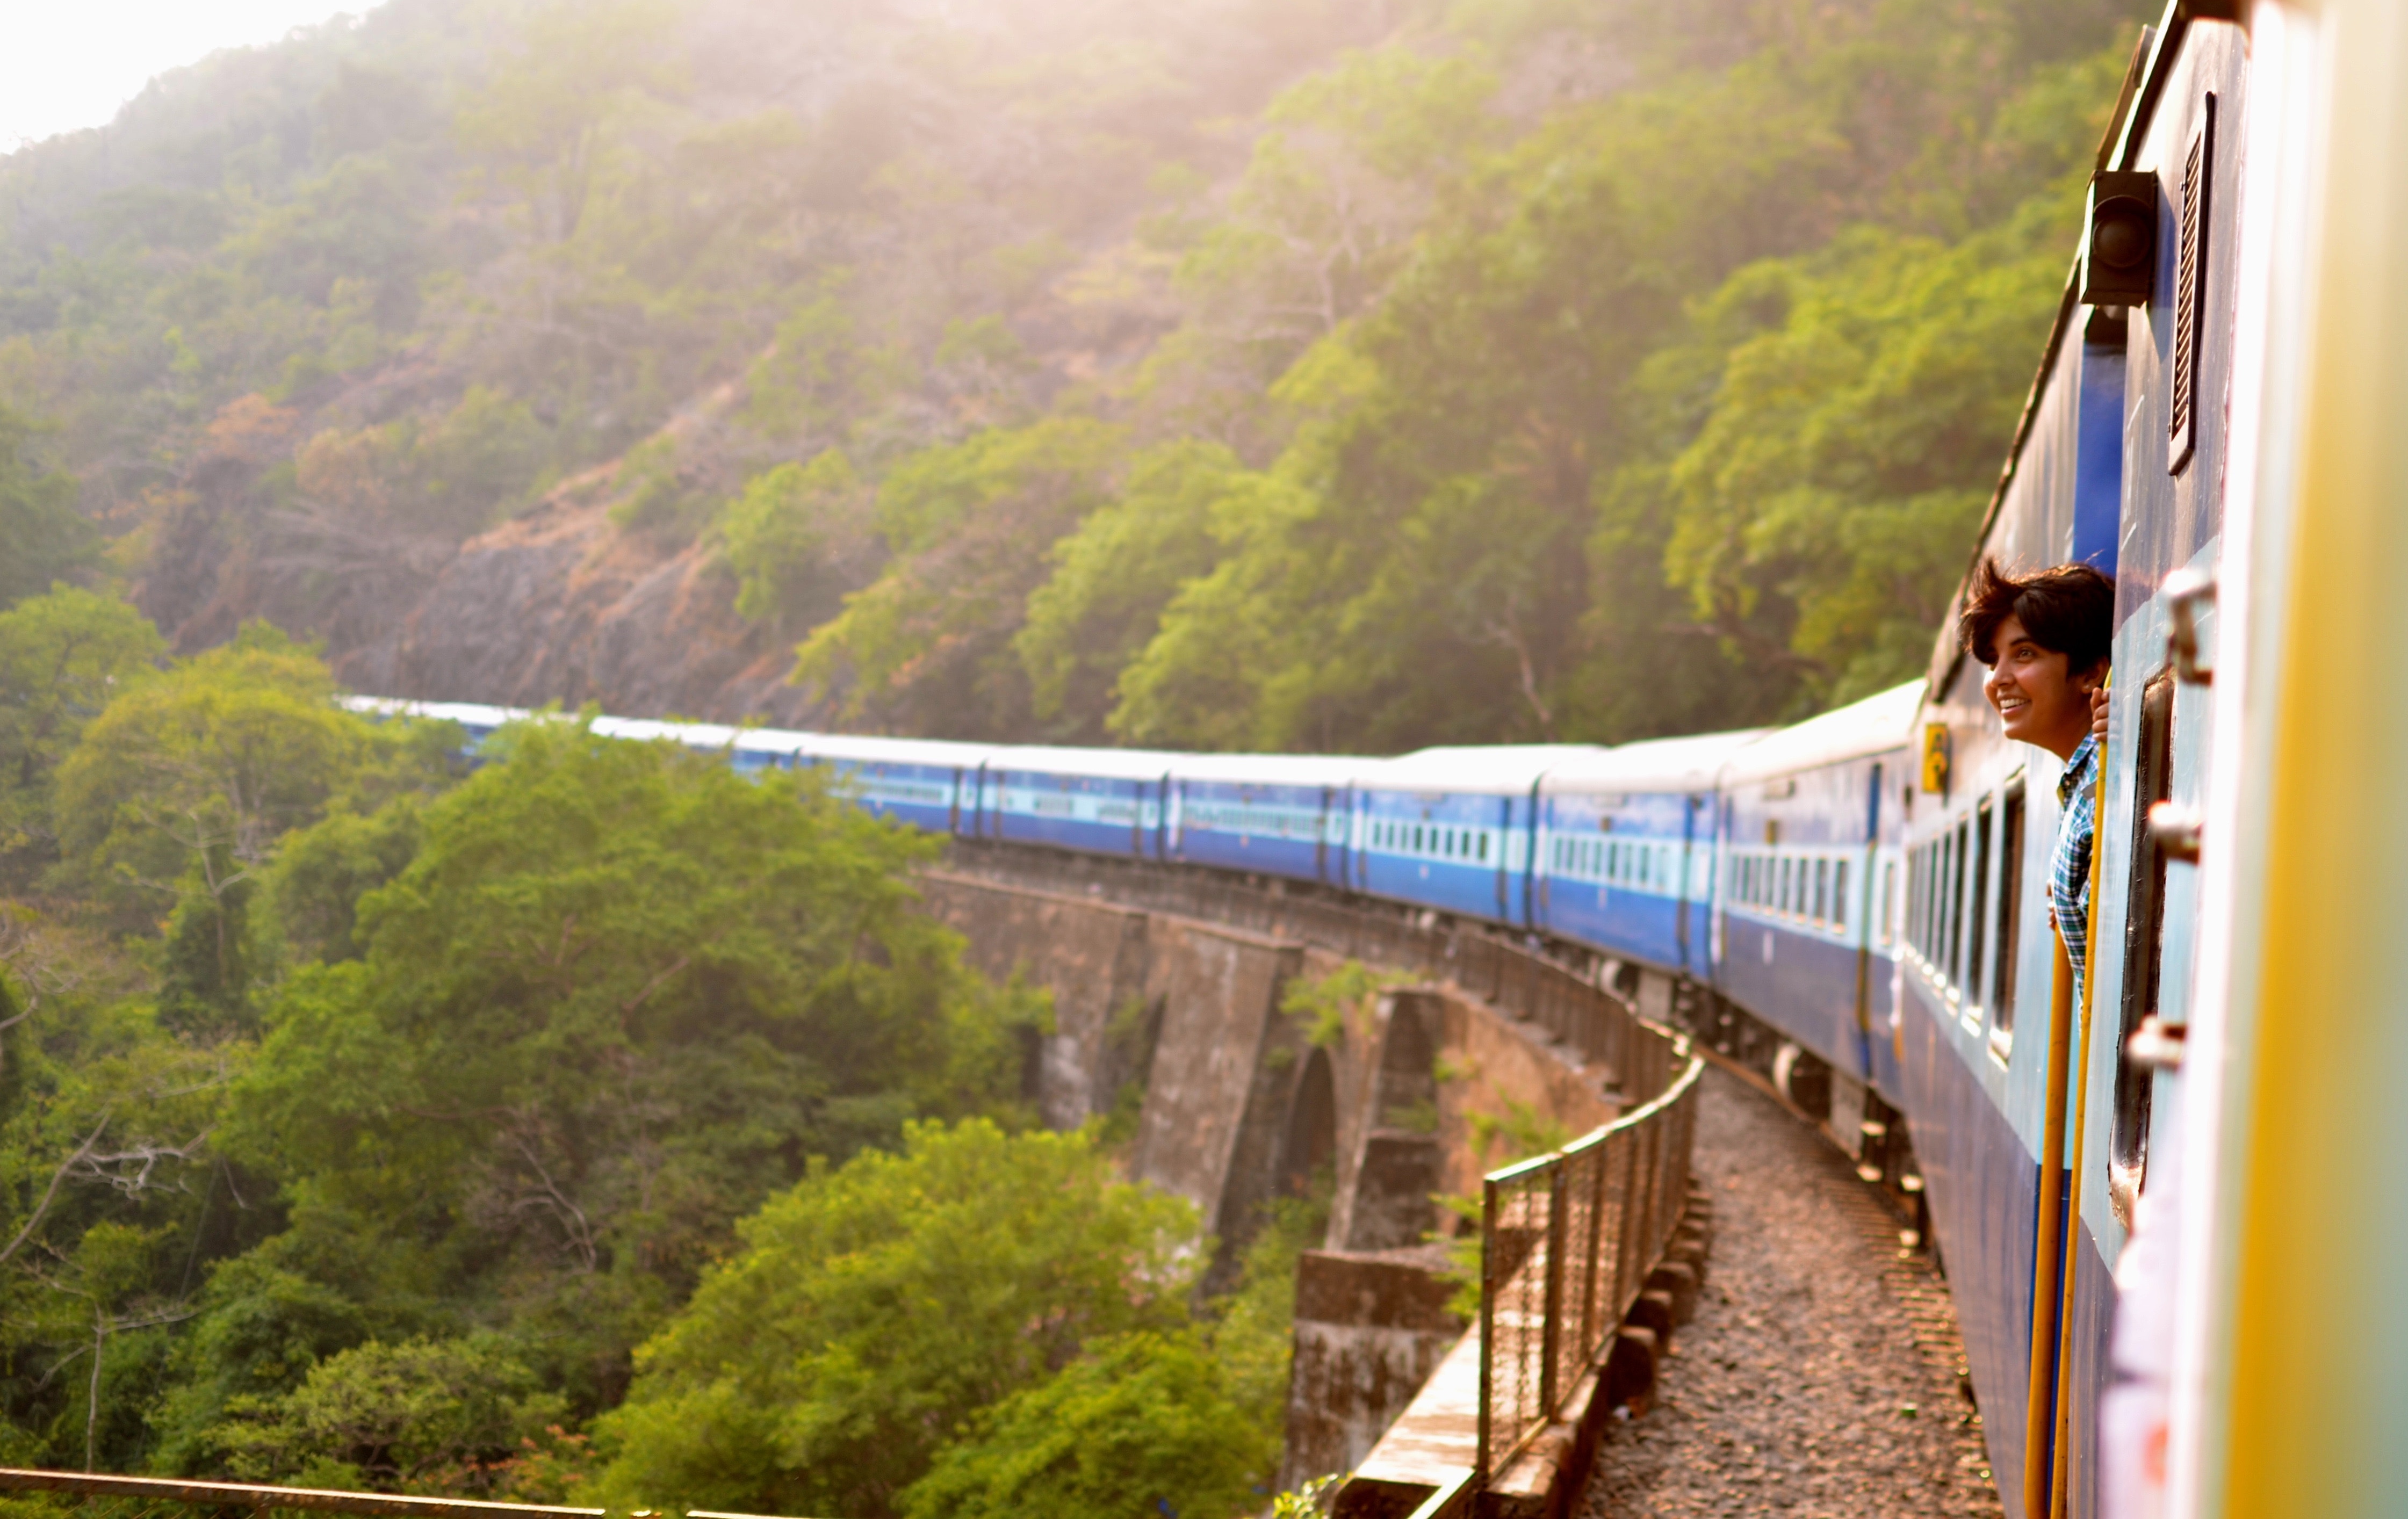 How to get to Rishikesh from Delhi by train plane bus and taxi